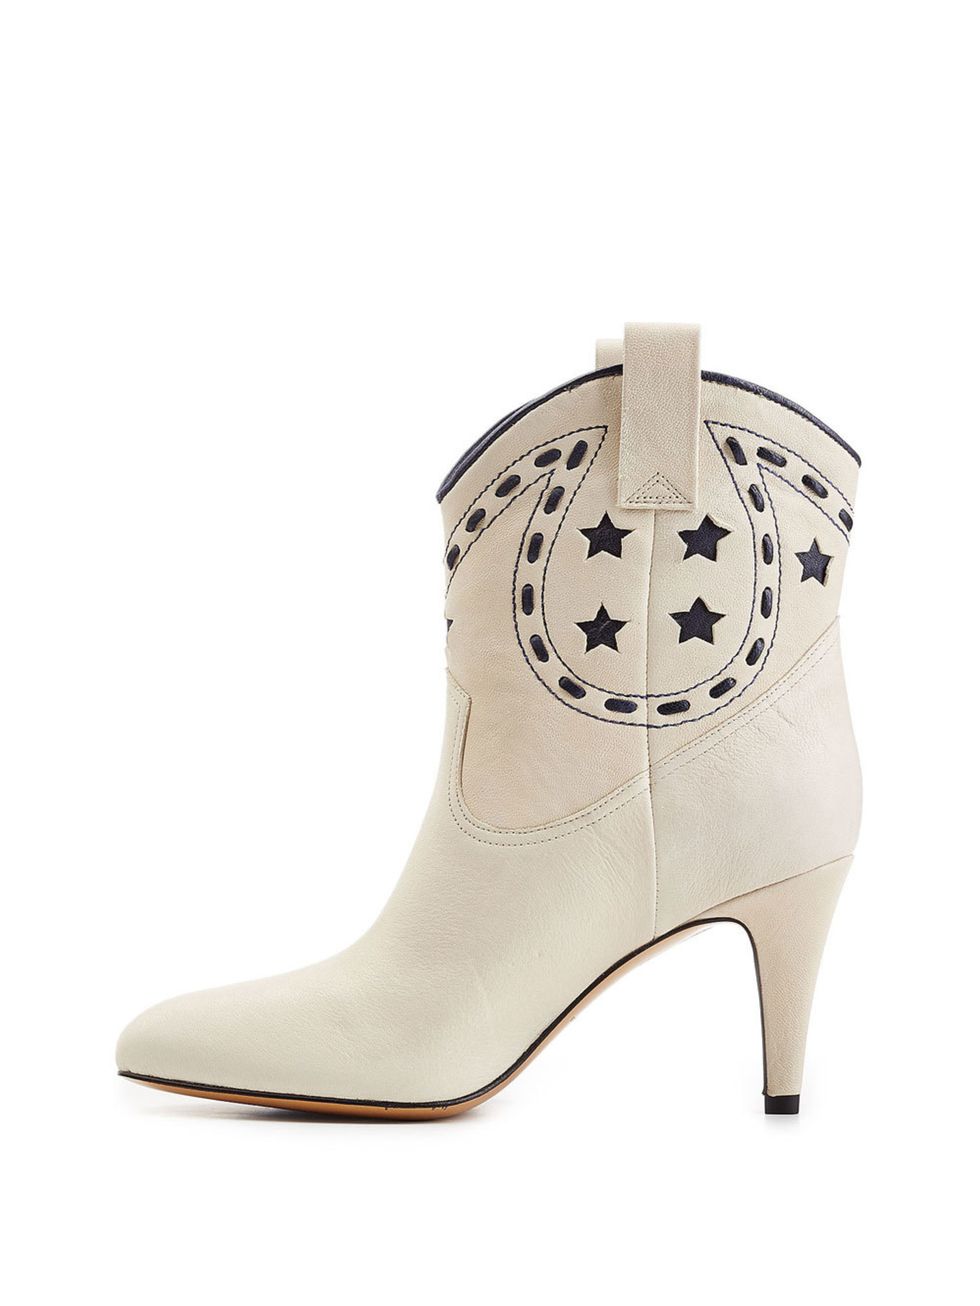 Boot, White, Beige, Ivory, Tan, Silver, Fashion design, Natural material, Leather, Synthetic rubber, 